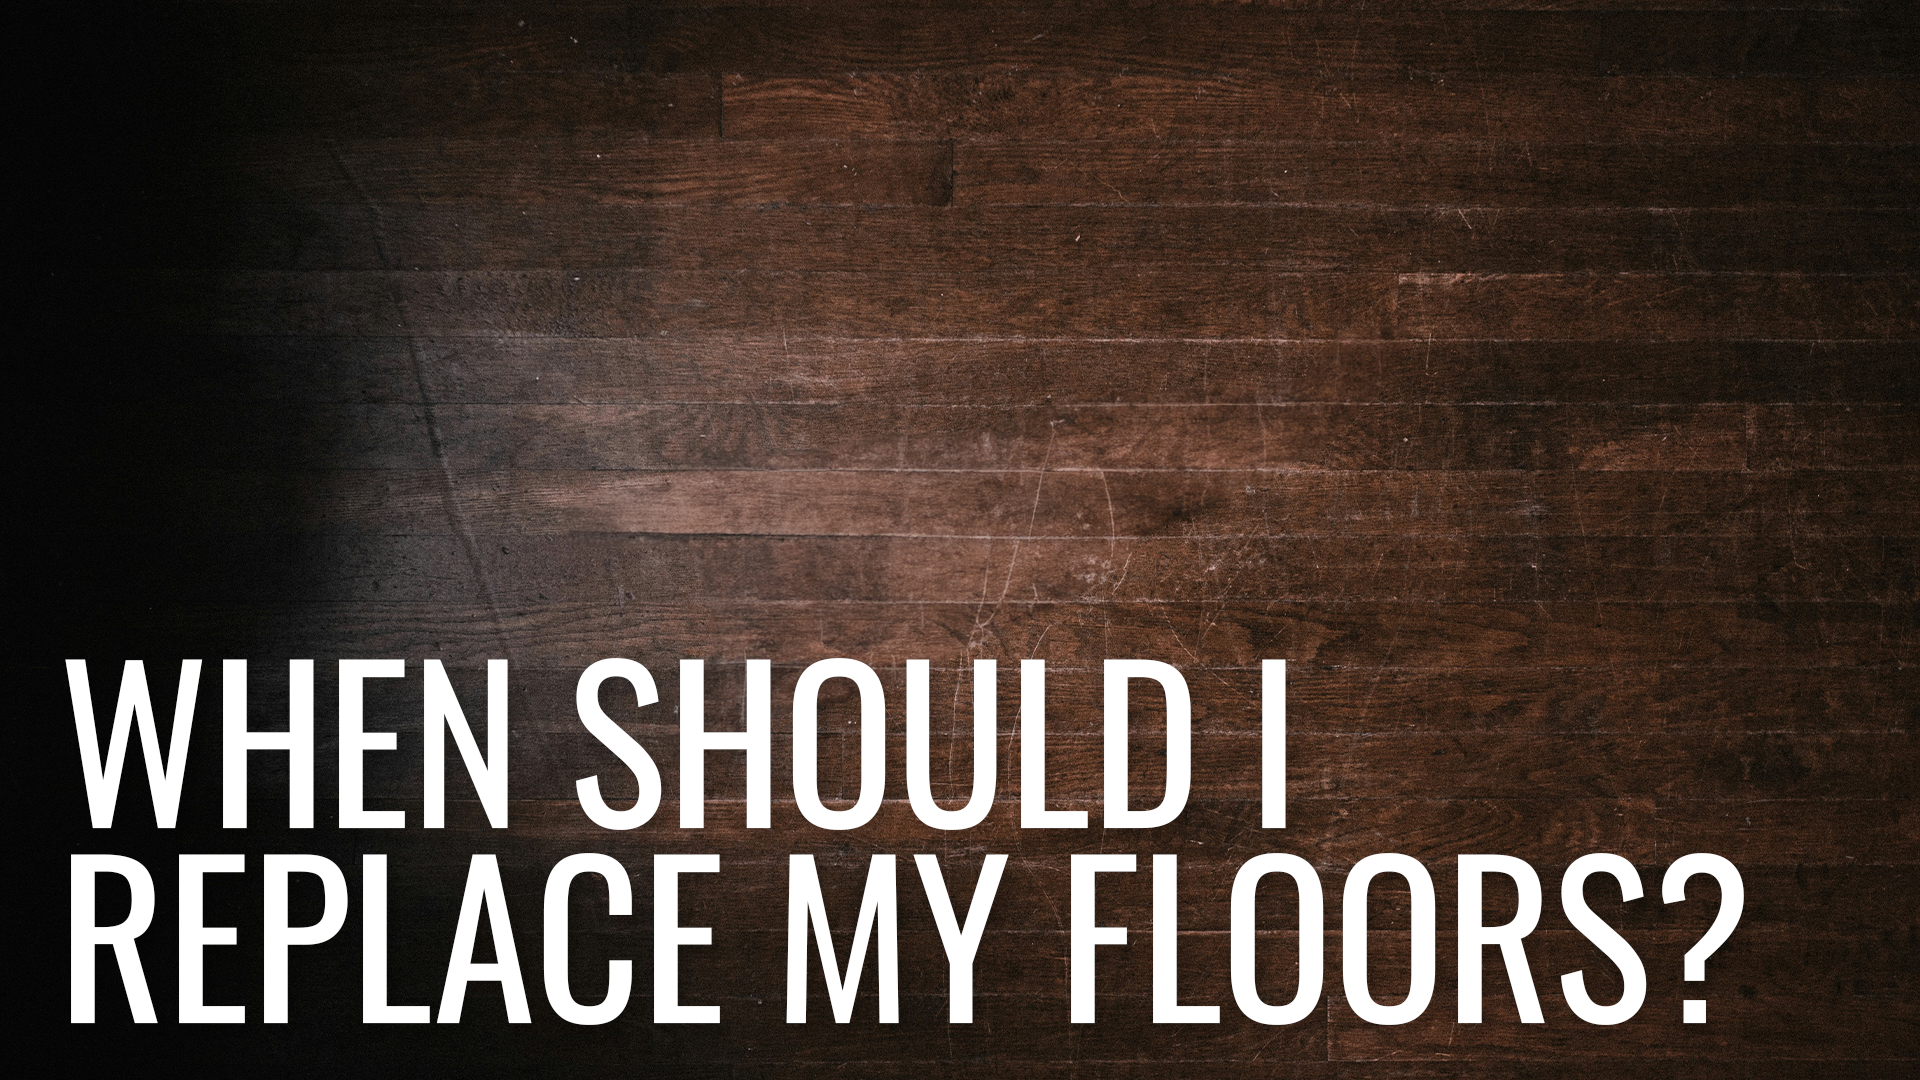 When Should I Replace My Floors?